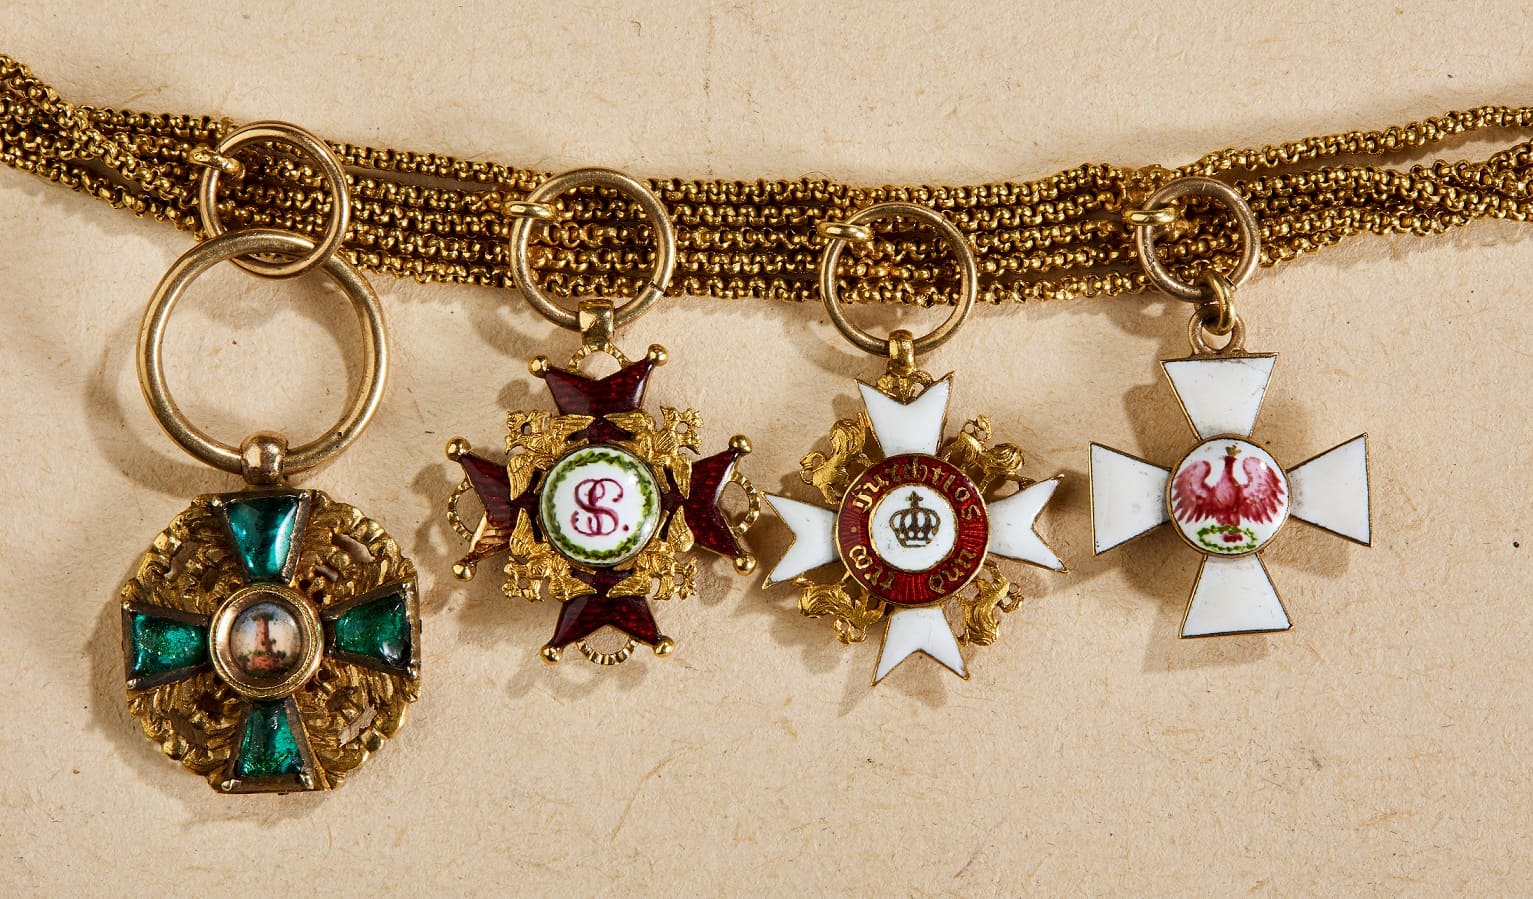 German-made   miniature group in gold and enamel.jpg